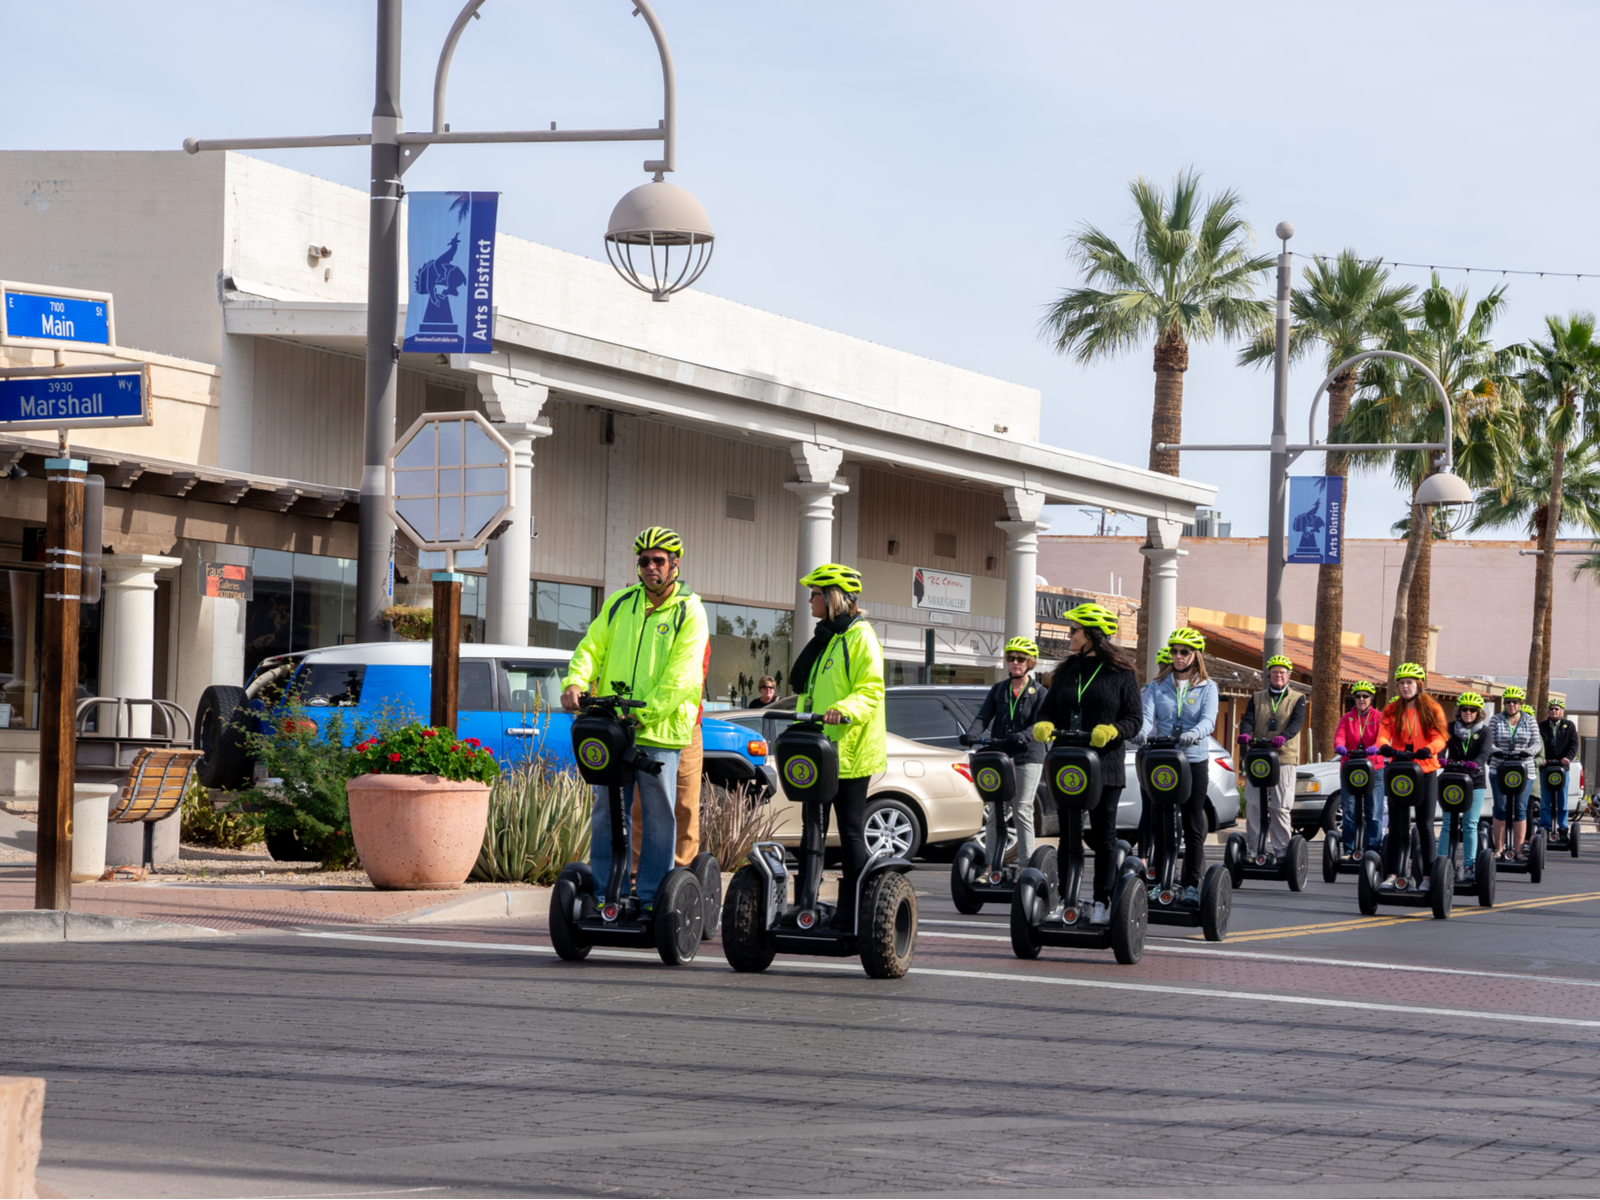 Segway tour in Old Town, one of the best things to do in Phoenix